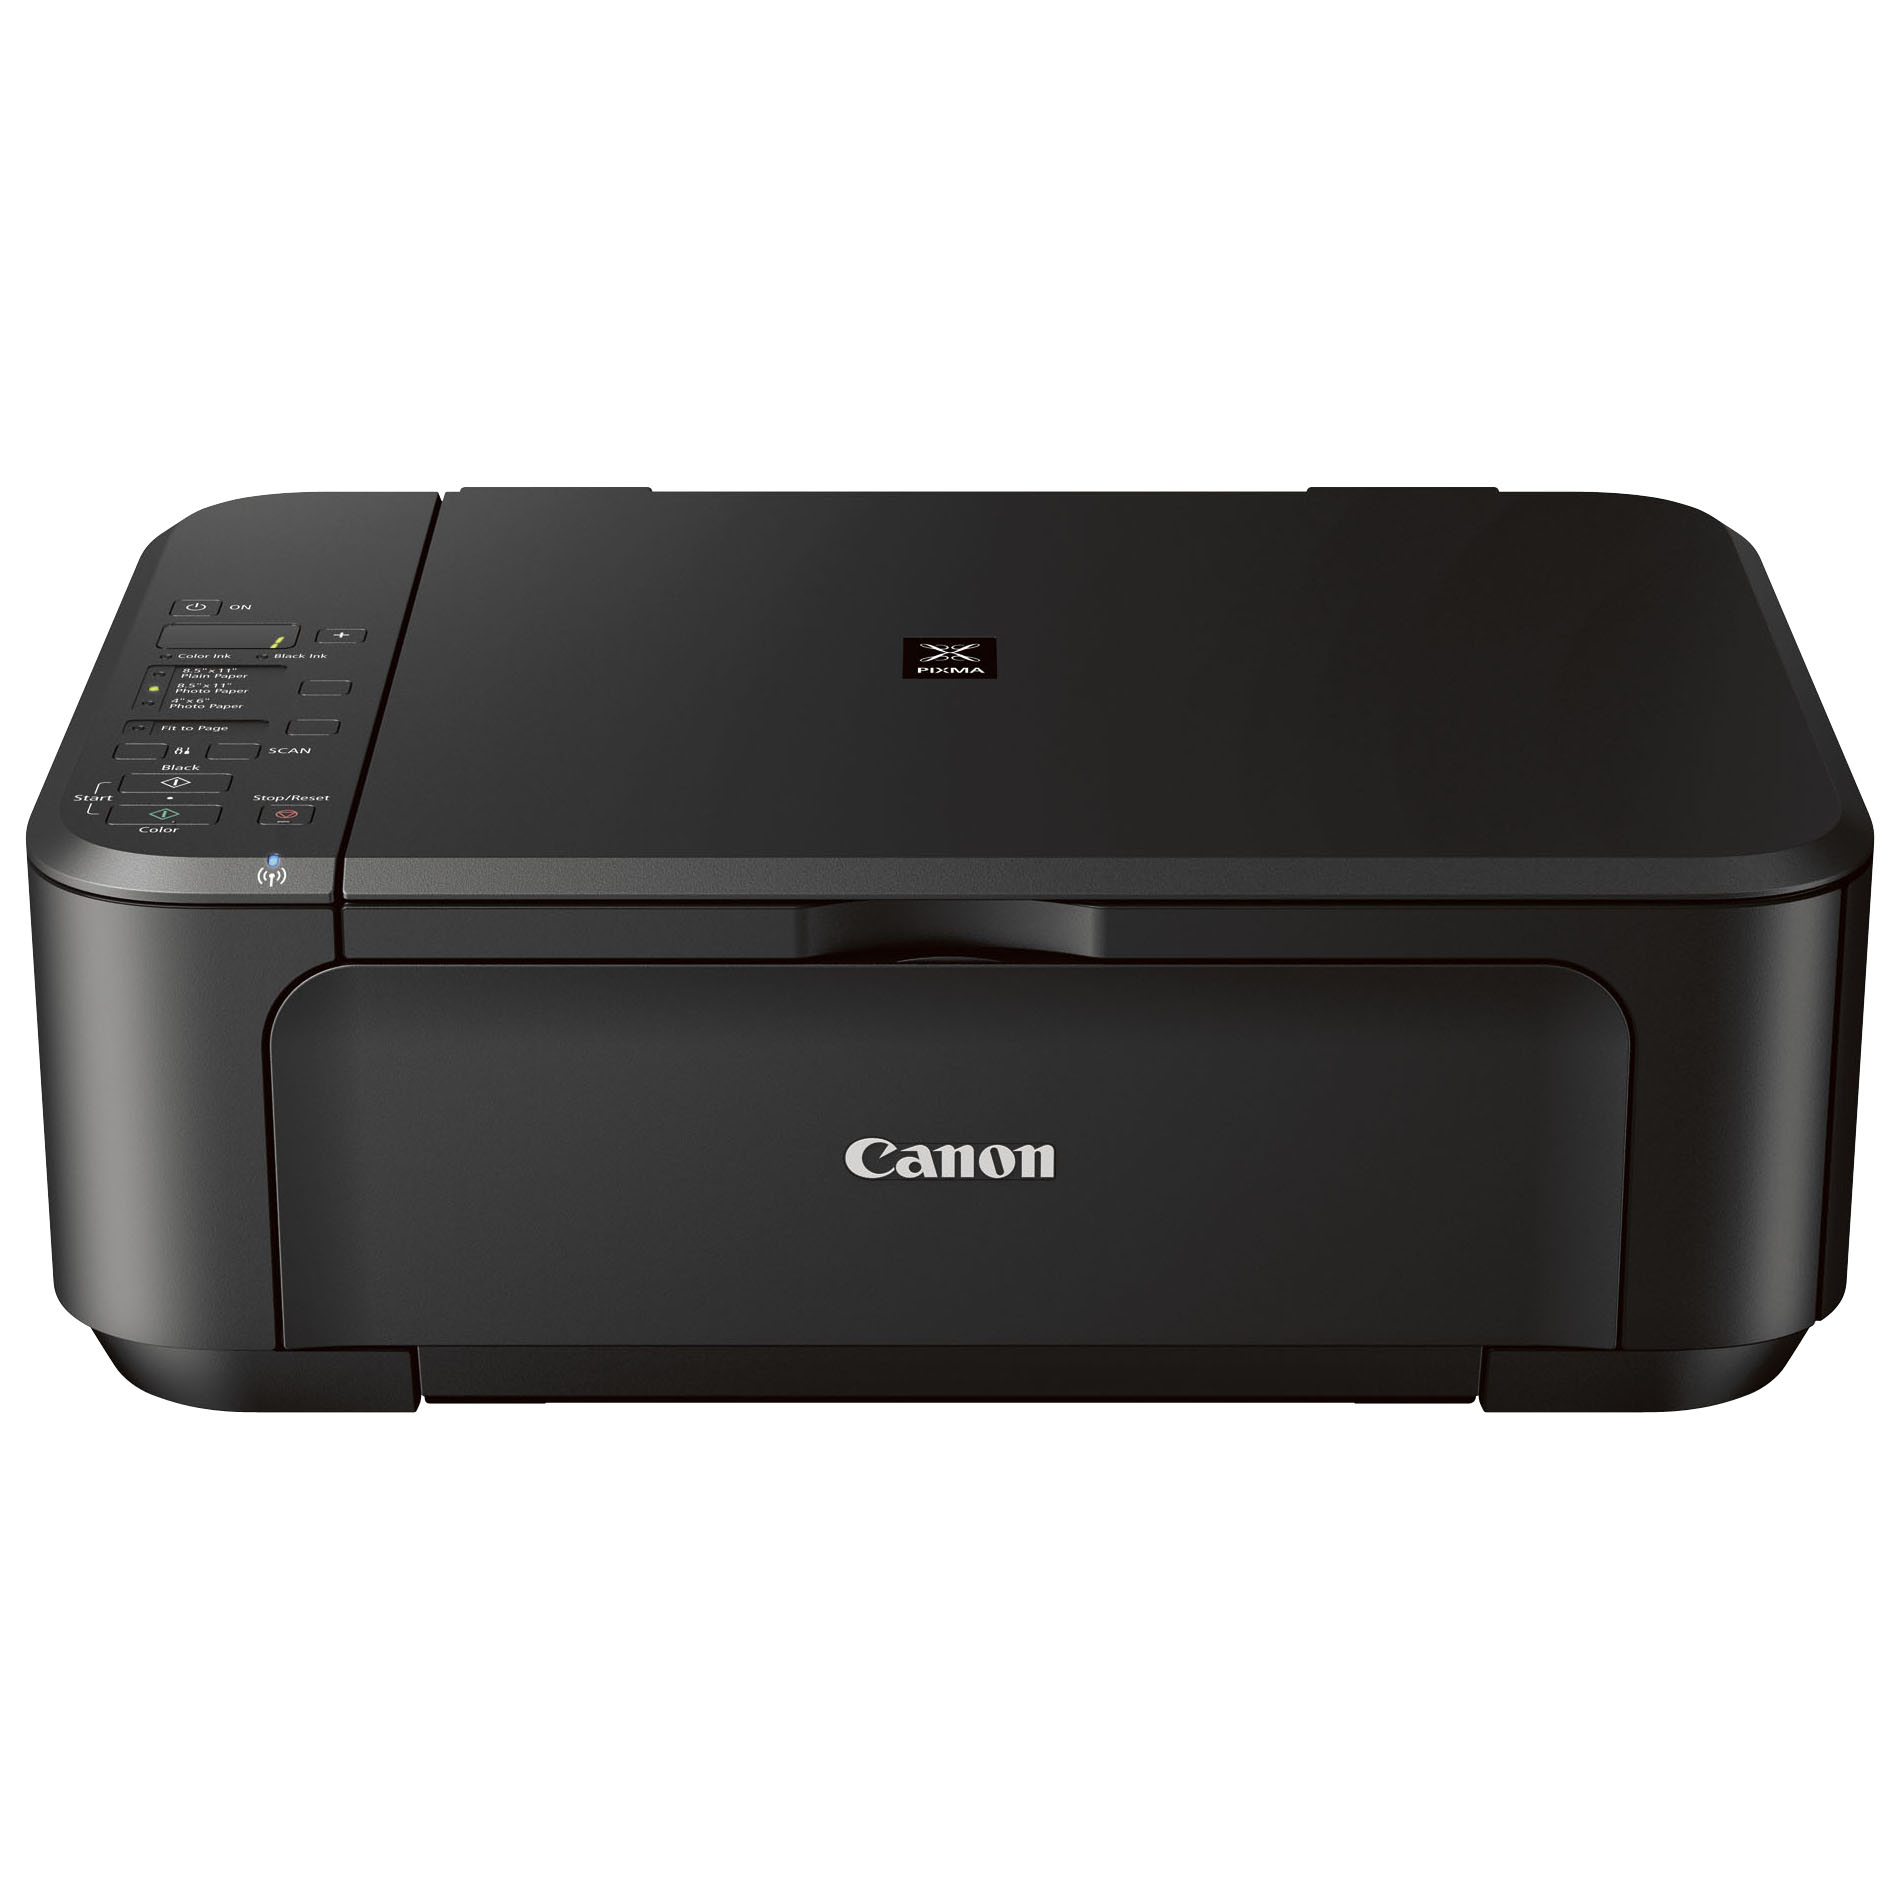 Canon PIXMA MG3222 Wireless Inkjet Photo All-In-One Printer/Copier/Scanner - image 1 of 3